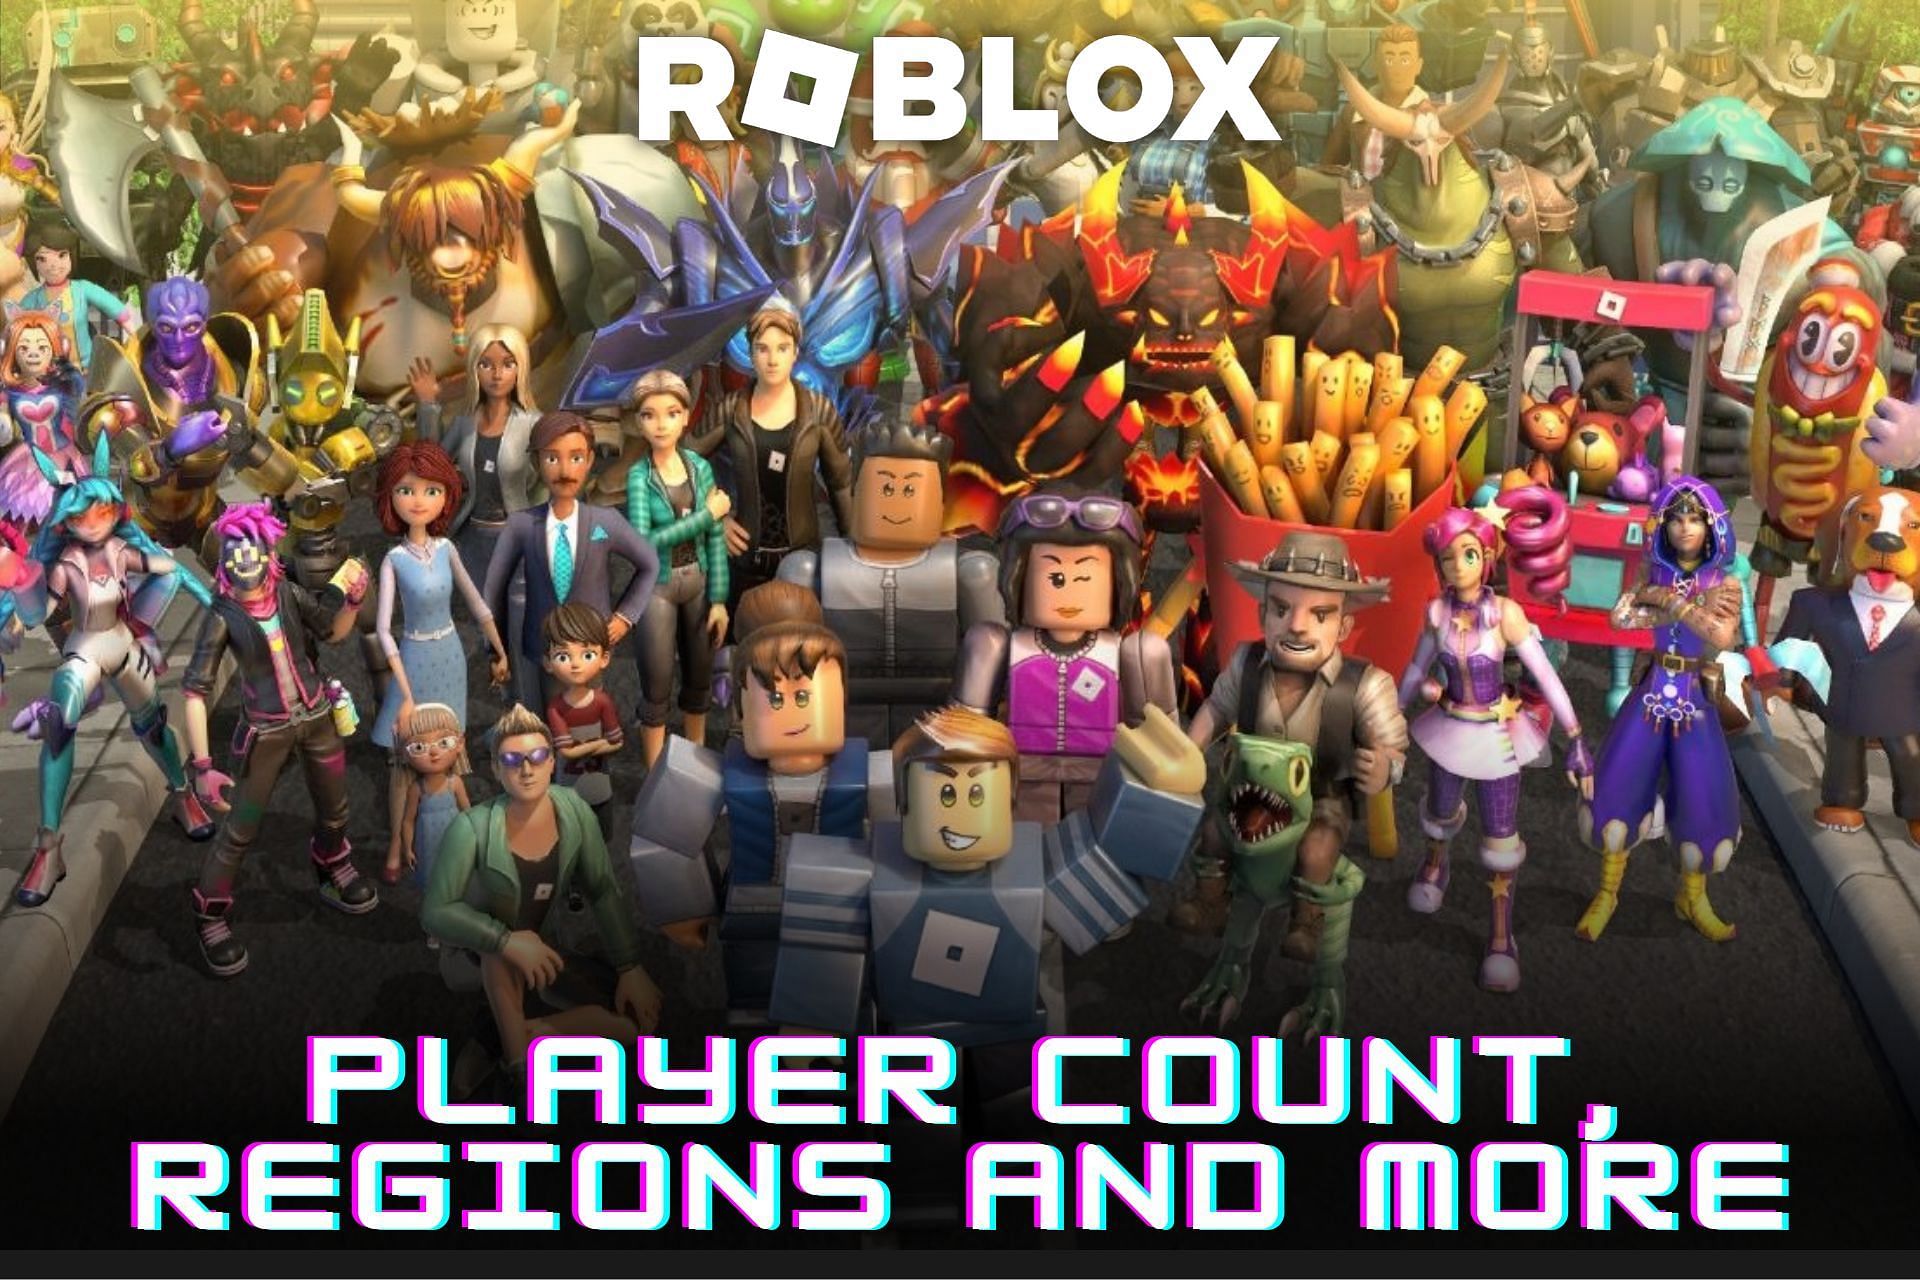 Roblox games player count as of 6:00-7:00 PM